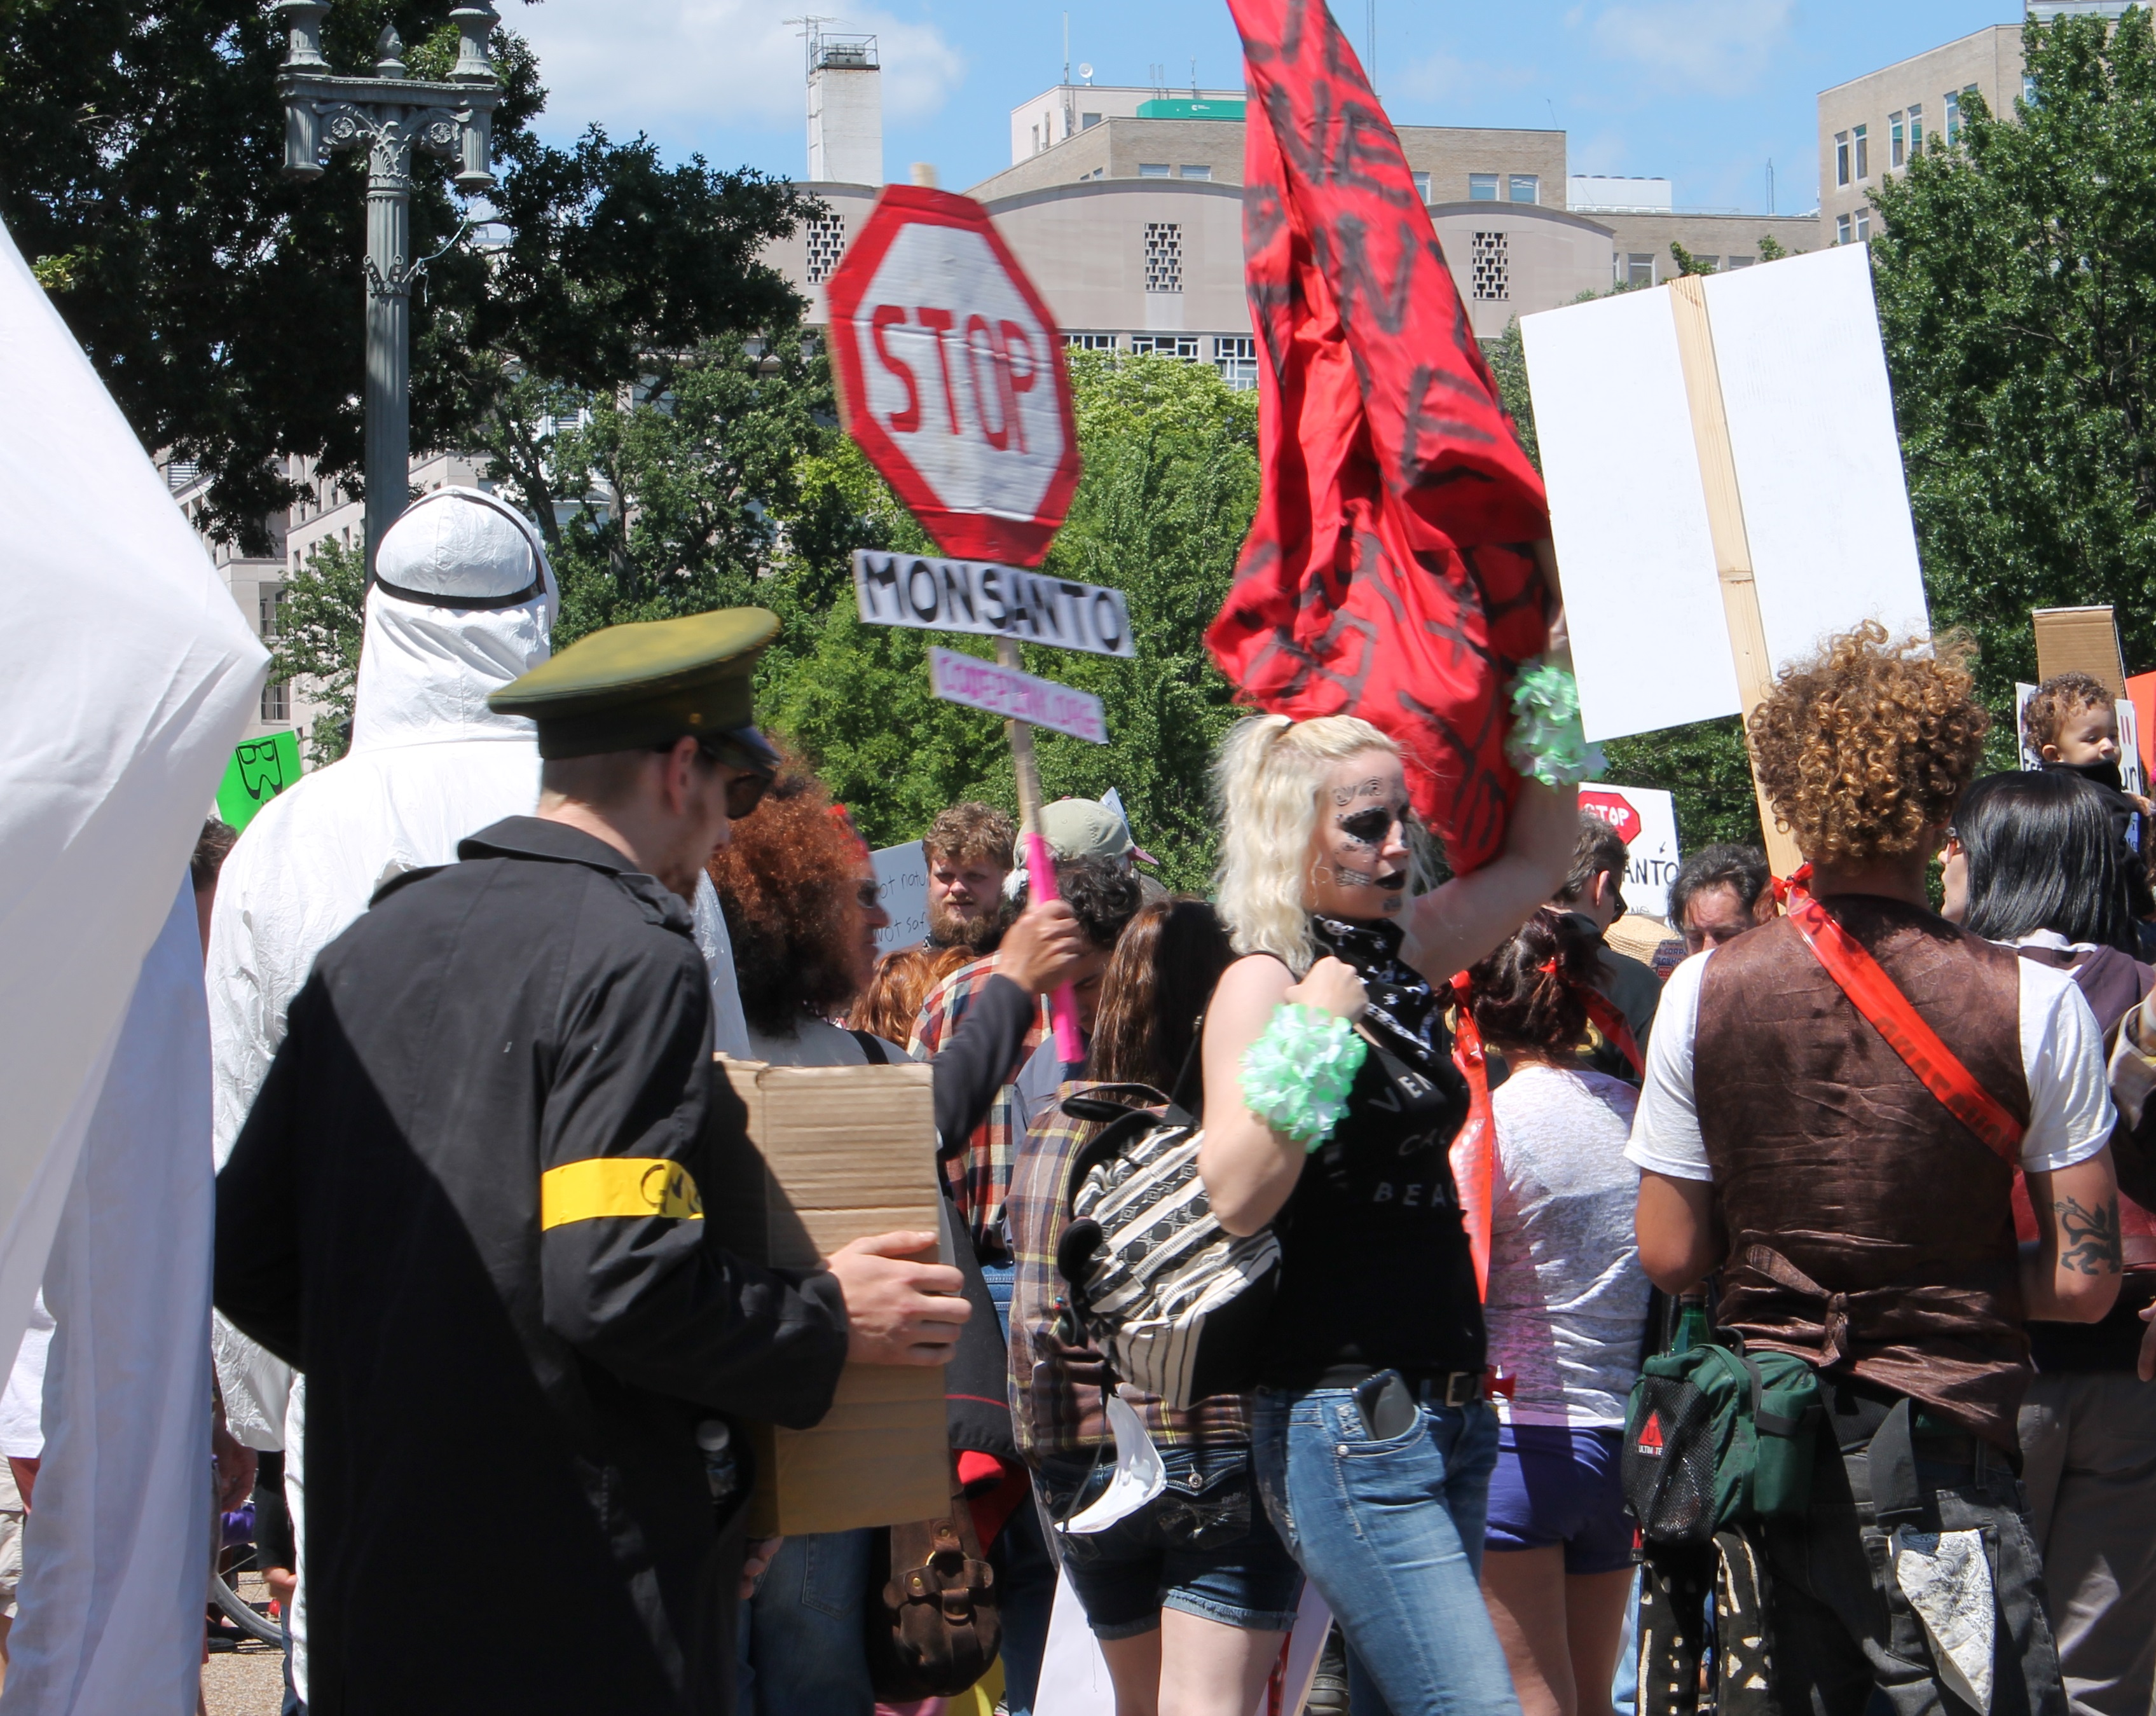 A group of protesters. One holds a stop sign that says "Stop Monsanto".